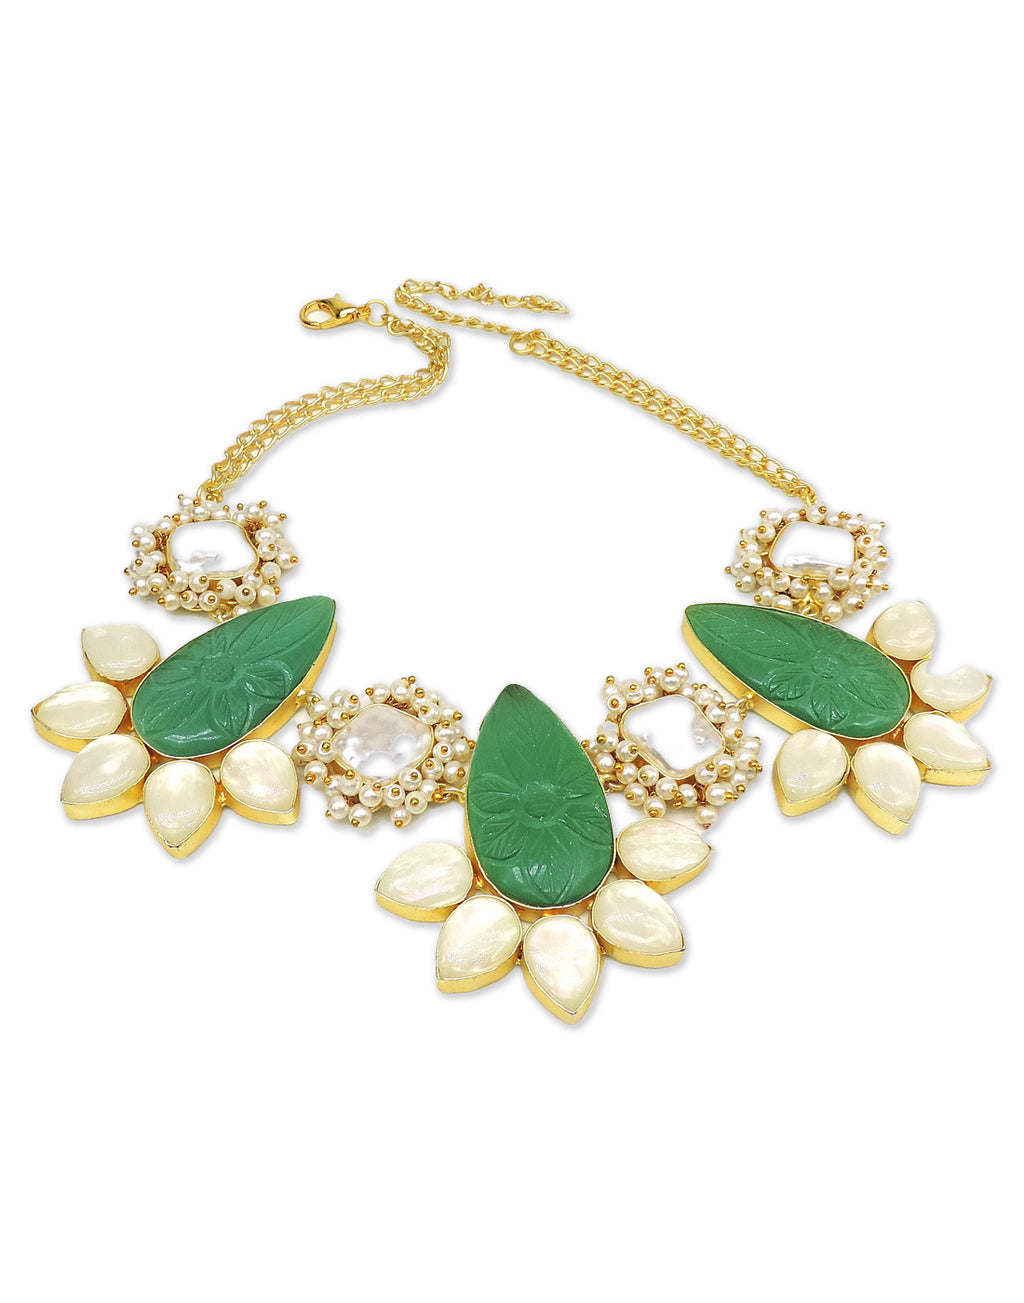 Green Haathi & Baroque Pearl Necklace - Statement Necklaces - Gold-Plated & Hypoallergenic Jewellery - Made in India - Dubai Jewellery - Dori